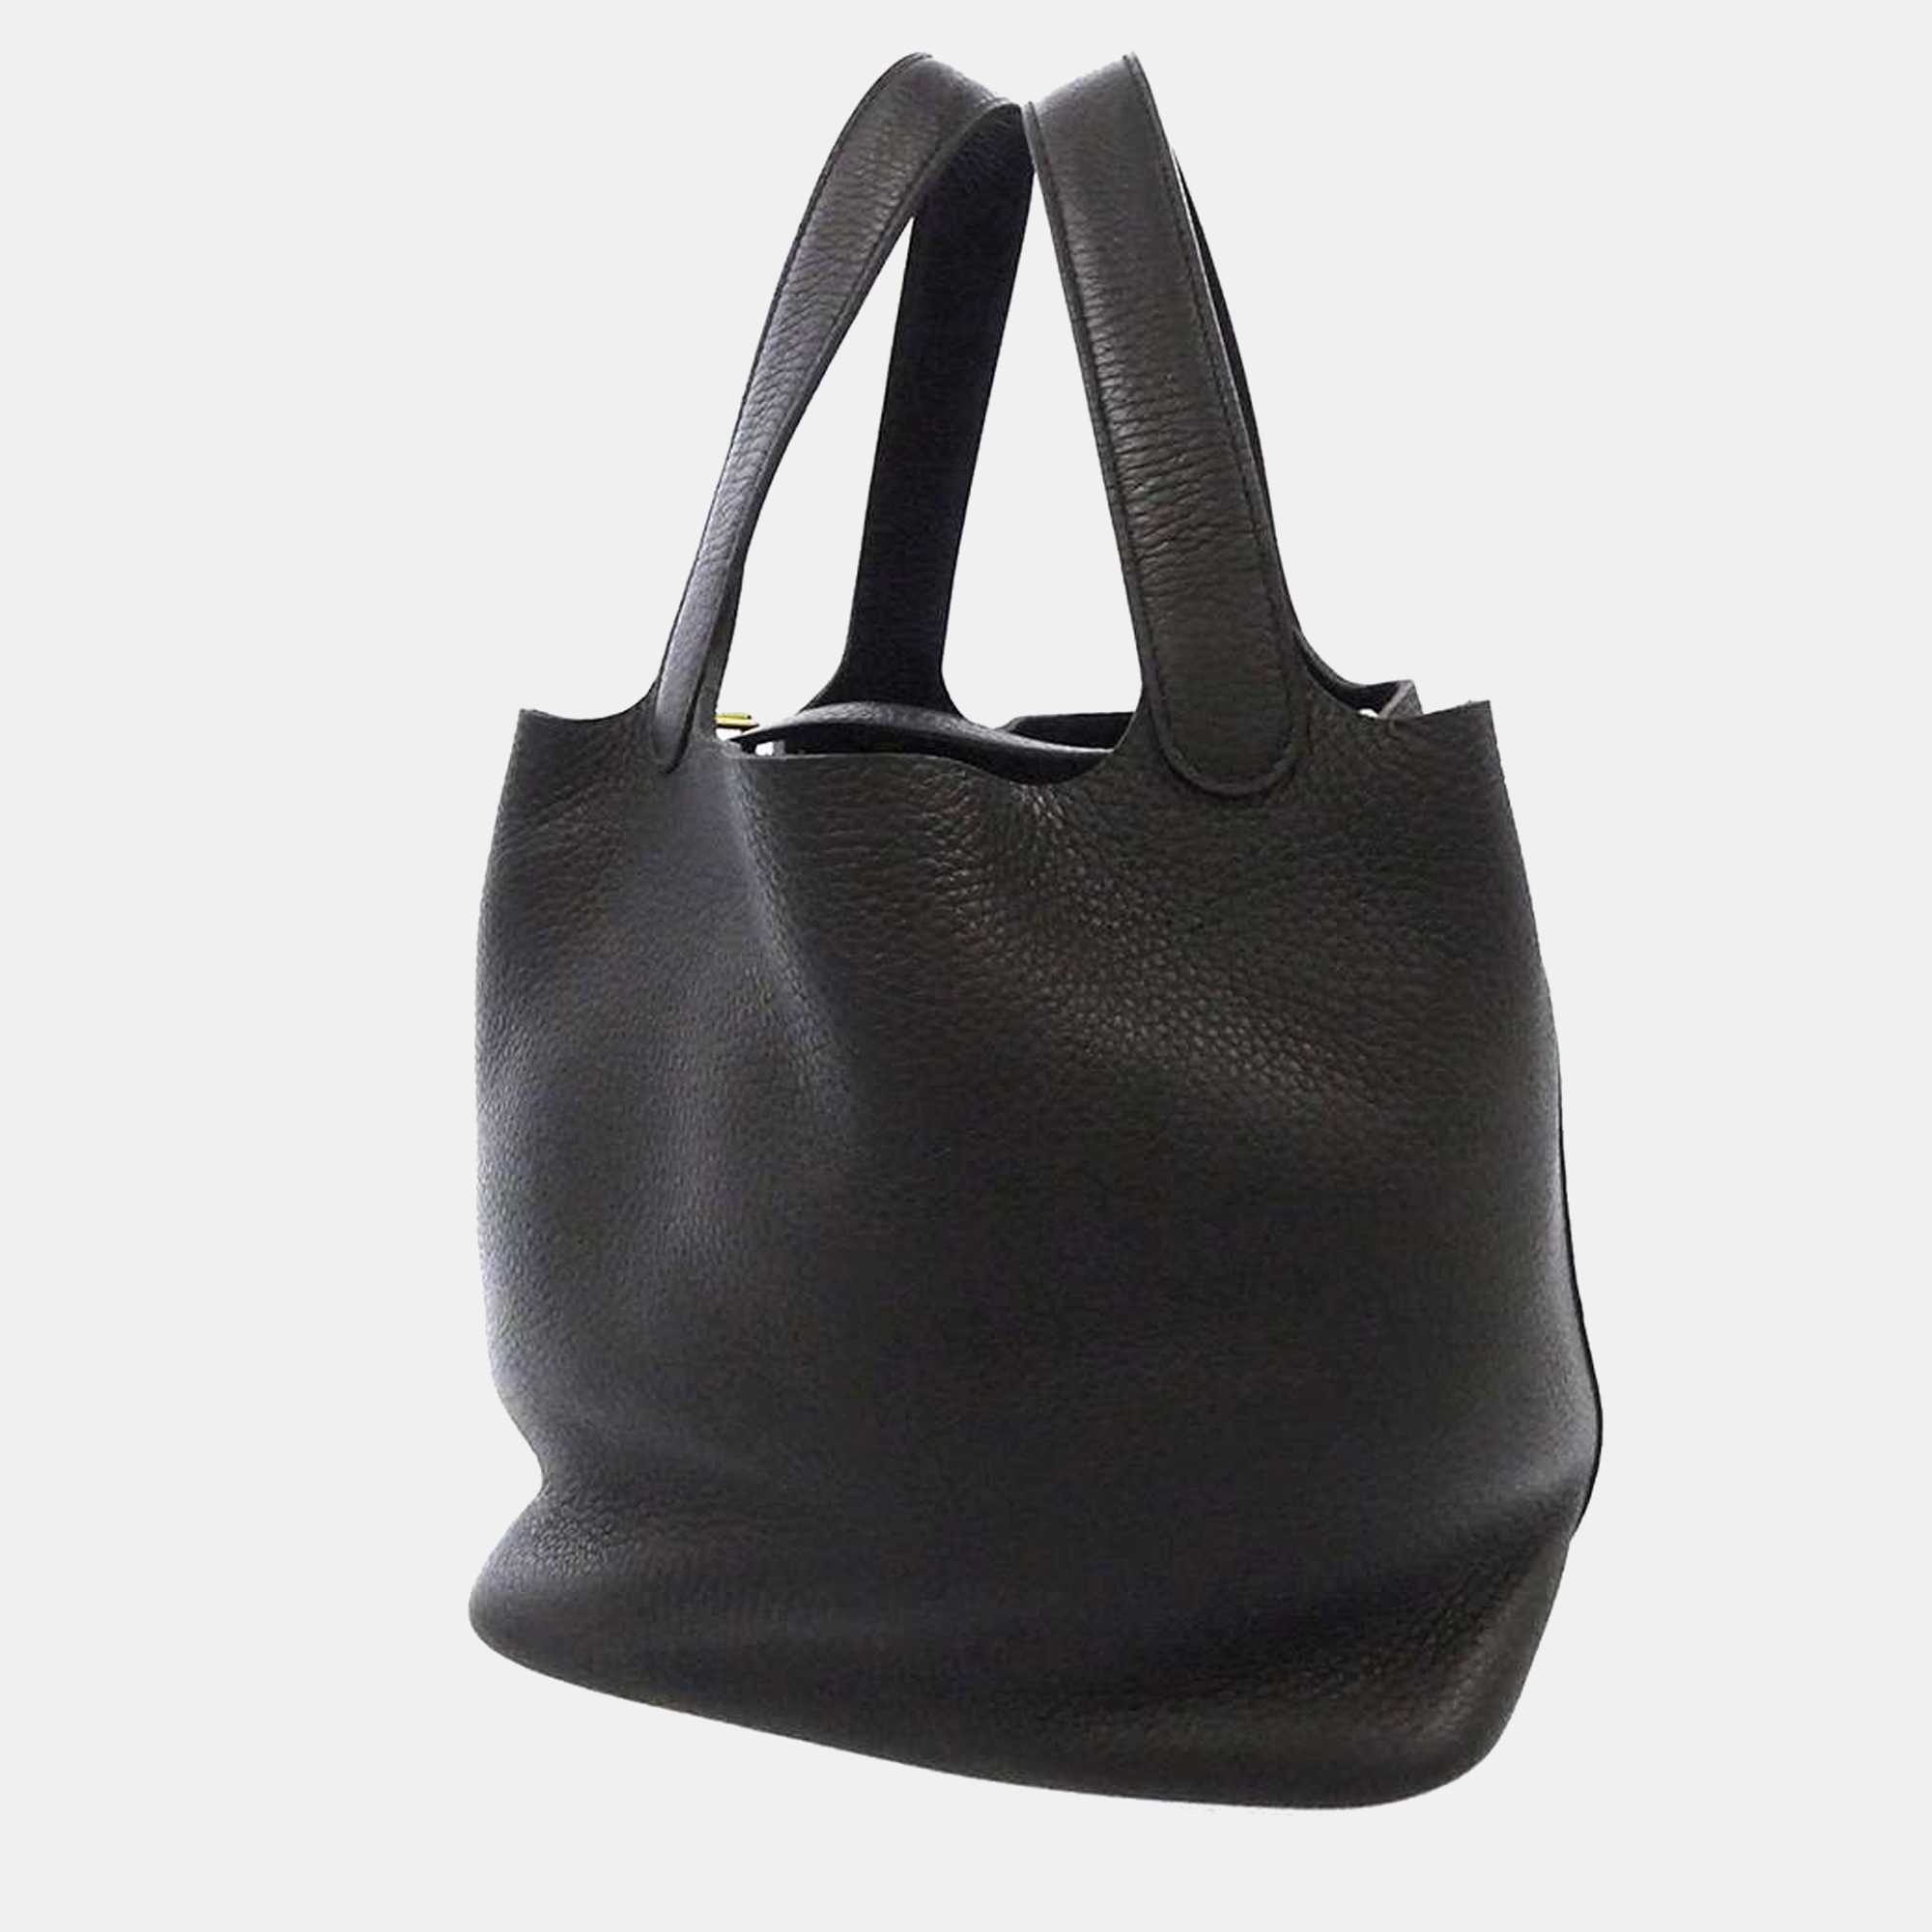 Hermes Black Taurillon Clemence Leather Picotin Lock MM Tote Bag